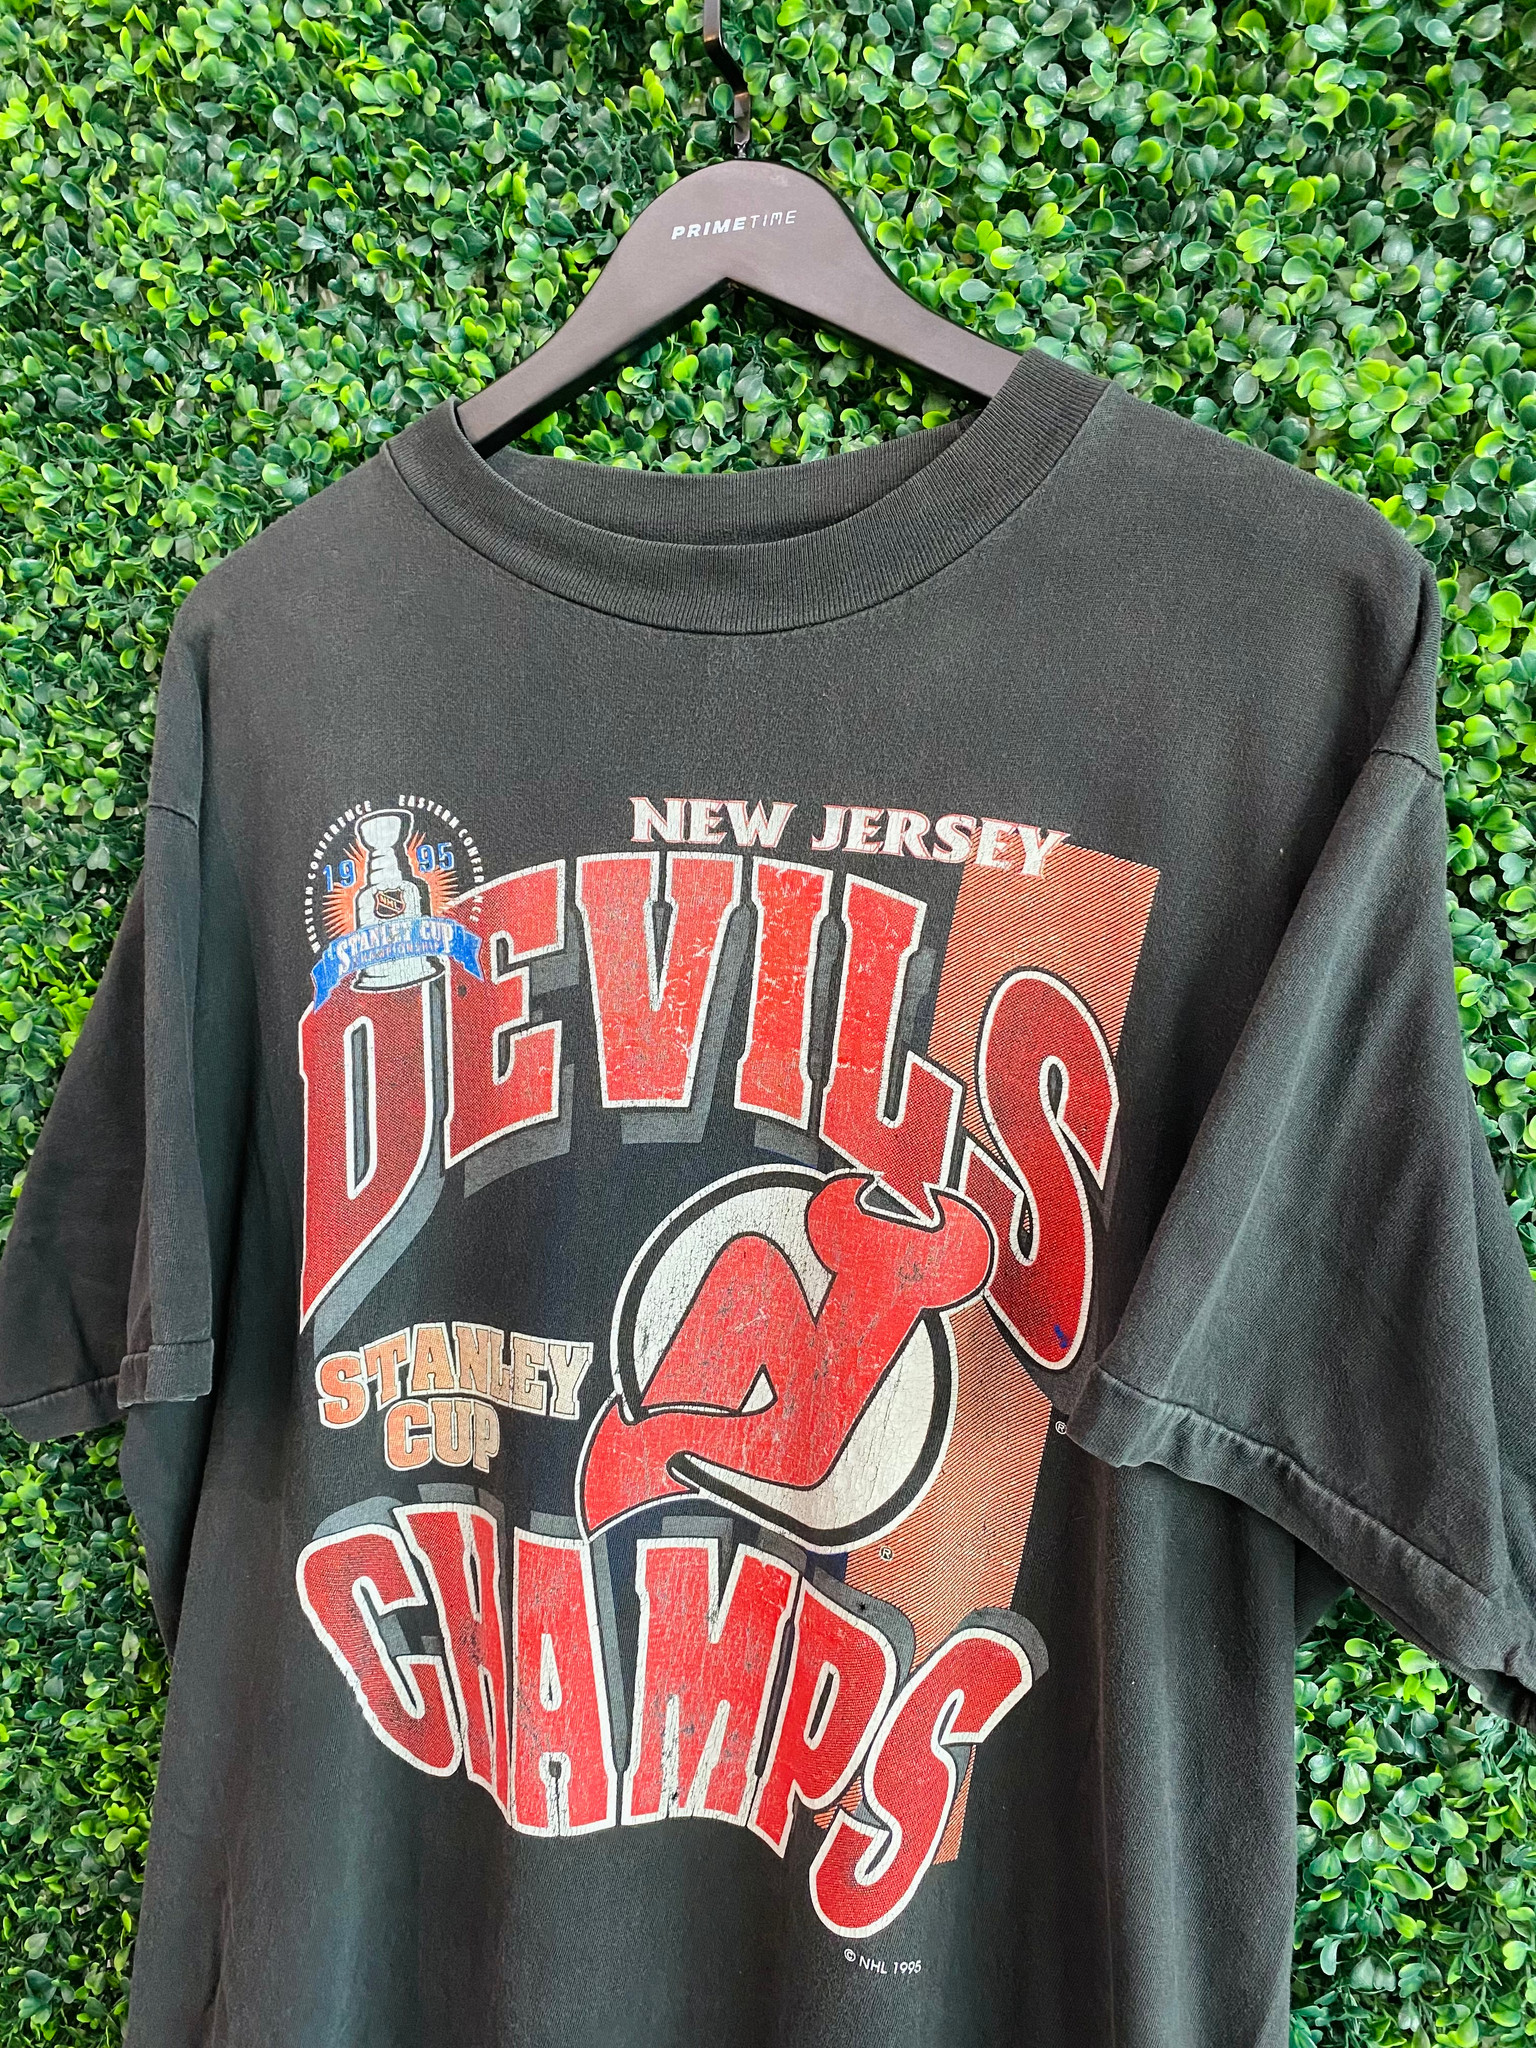 NHL New Jersey Devils 2000 Stanley Cup Champions TShirt Size M NOS